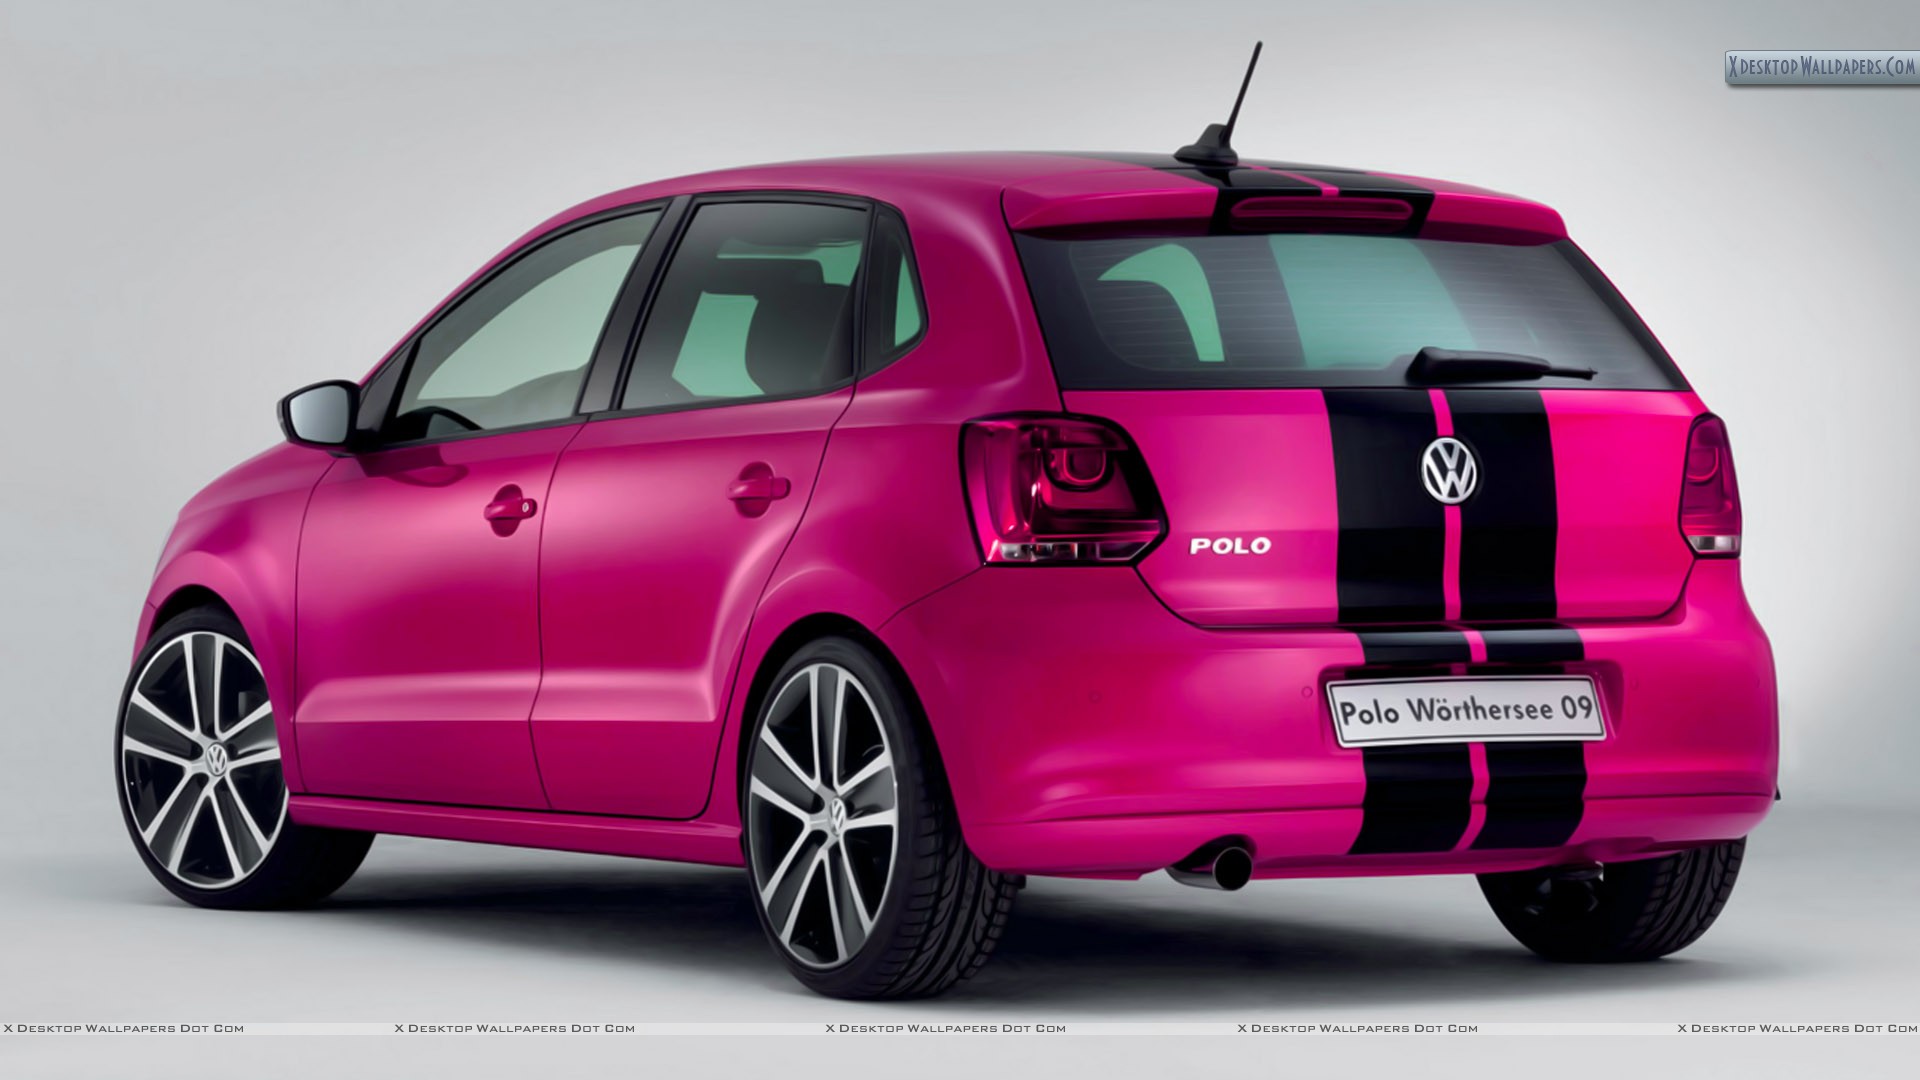 Pink Cars Wallpaper Photos Image In HD